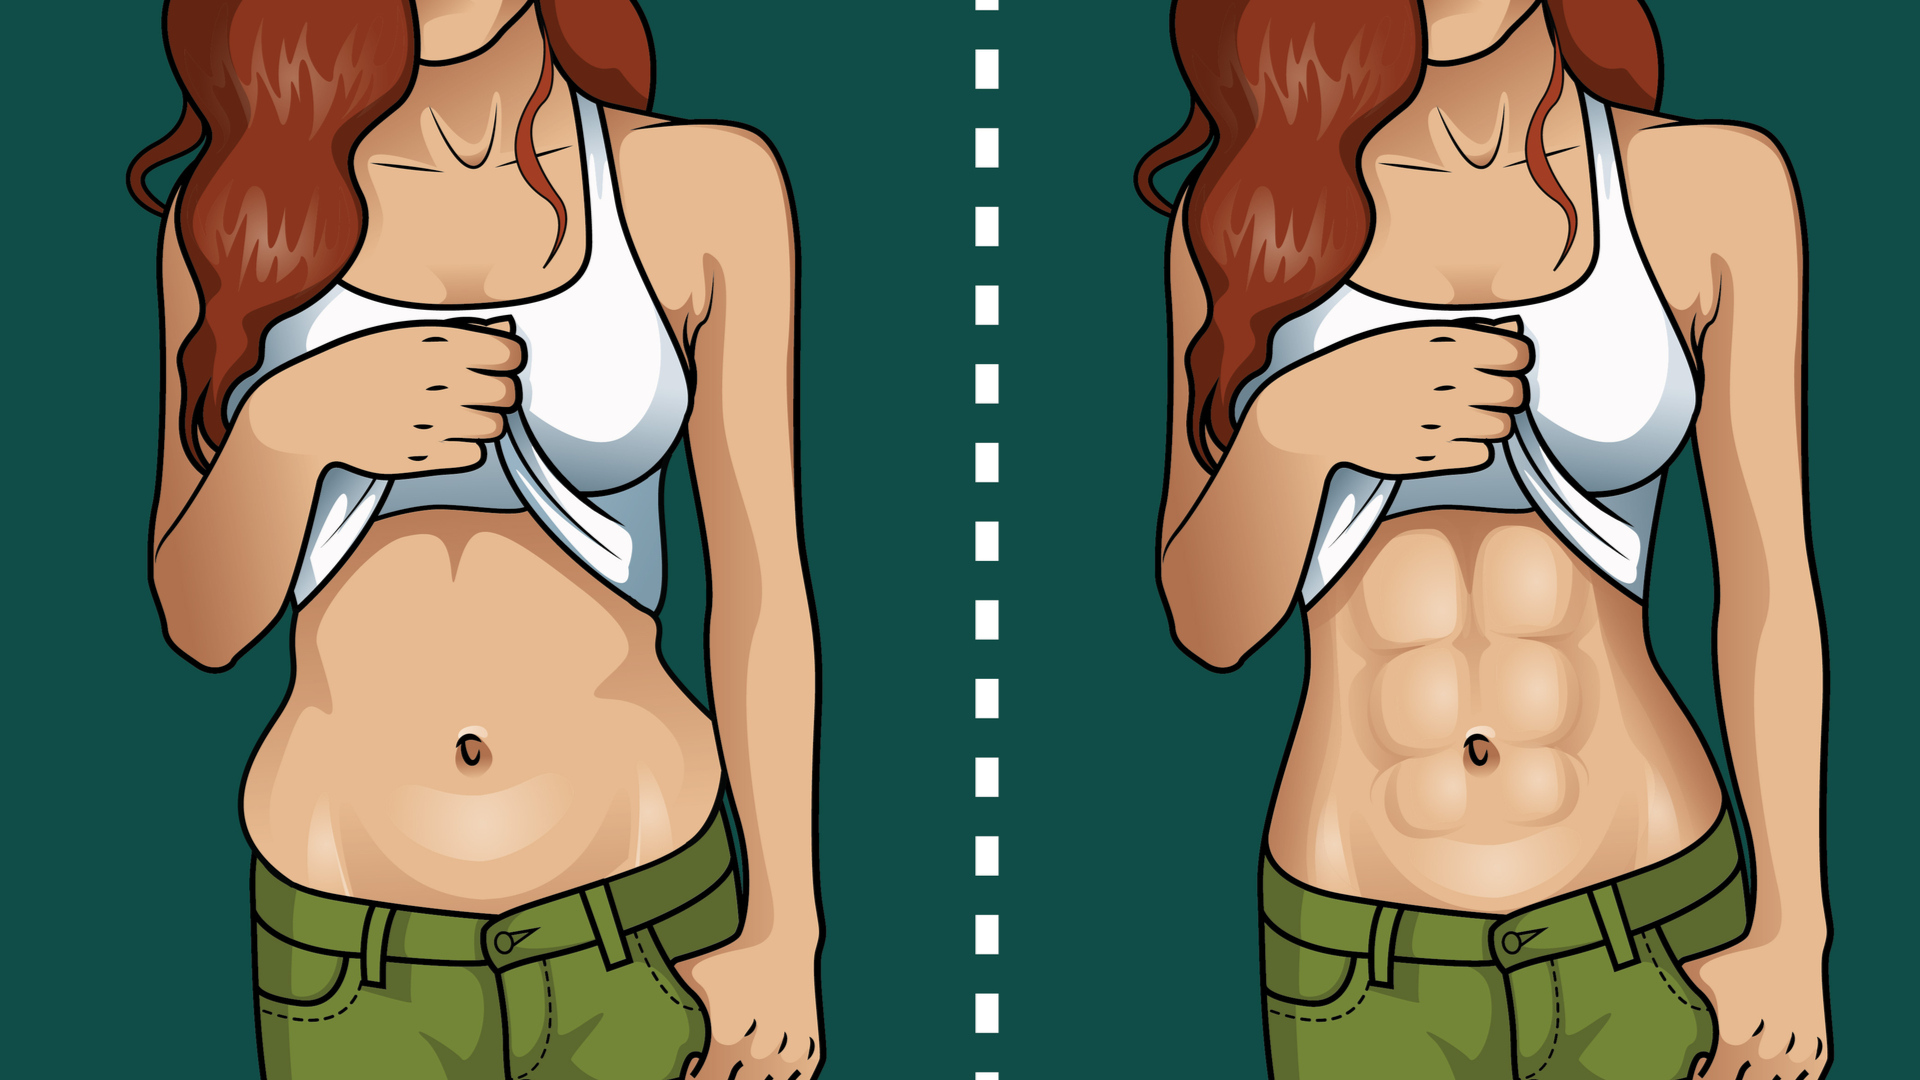 Red-haired woman with white shirt and green trousers holding her shirt up showing her belly before and after dieting.